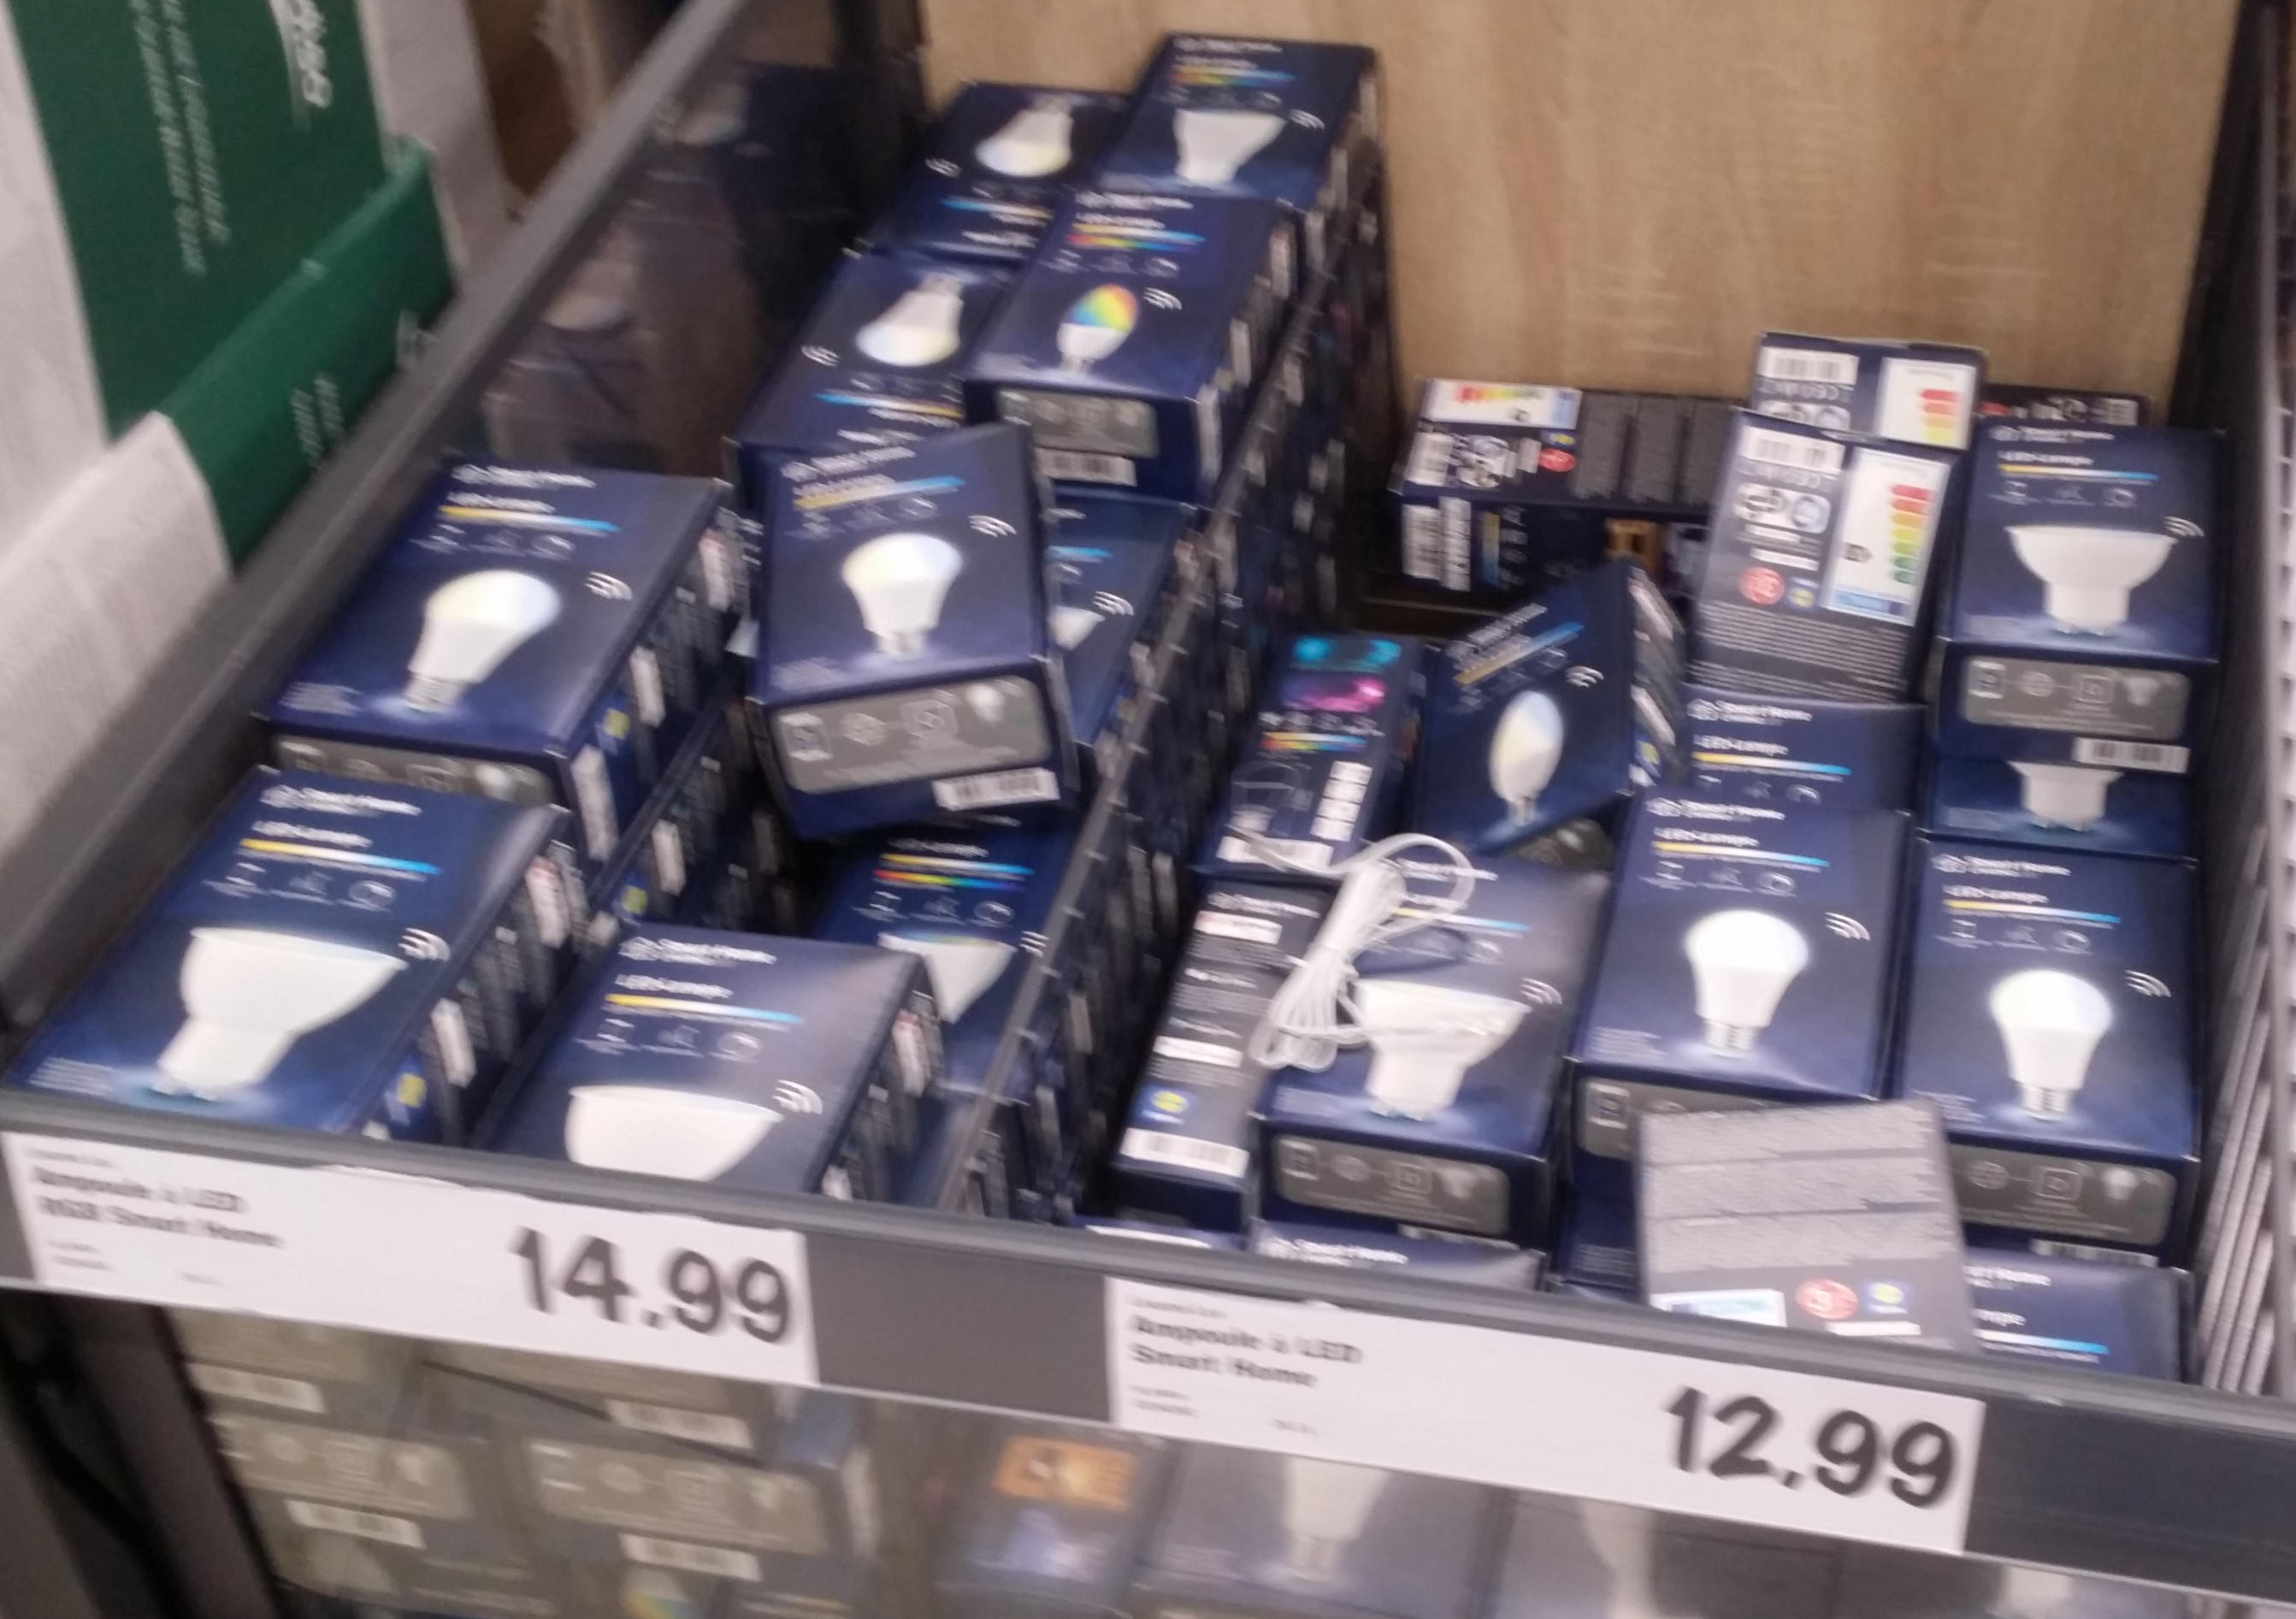 Lidl (Silvercrest and Livarno Lux) branded Zigbee products for Open Source  users